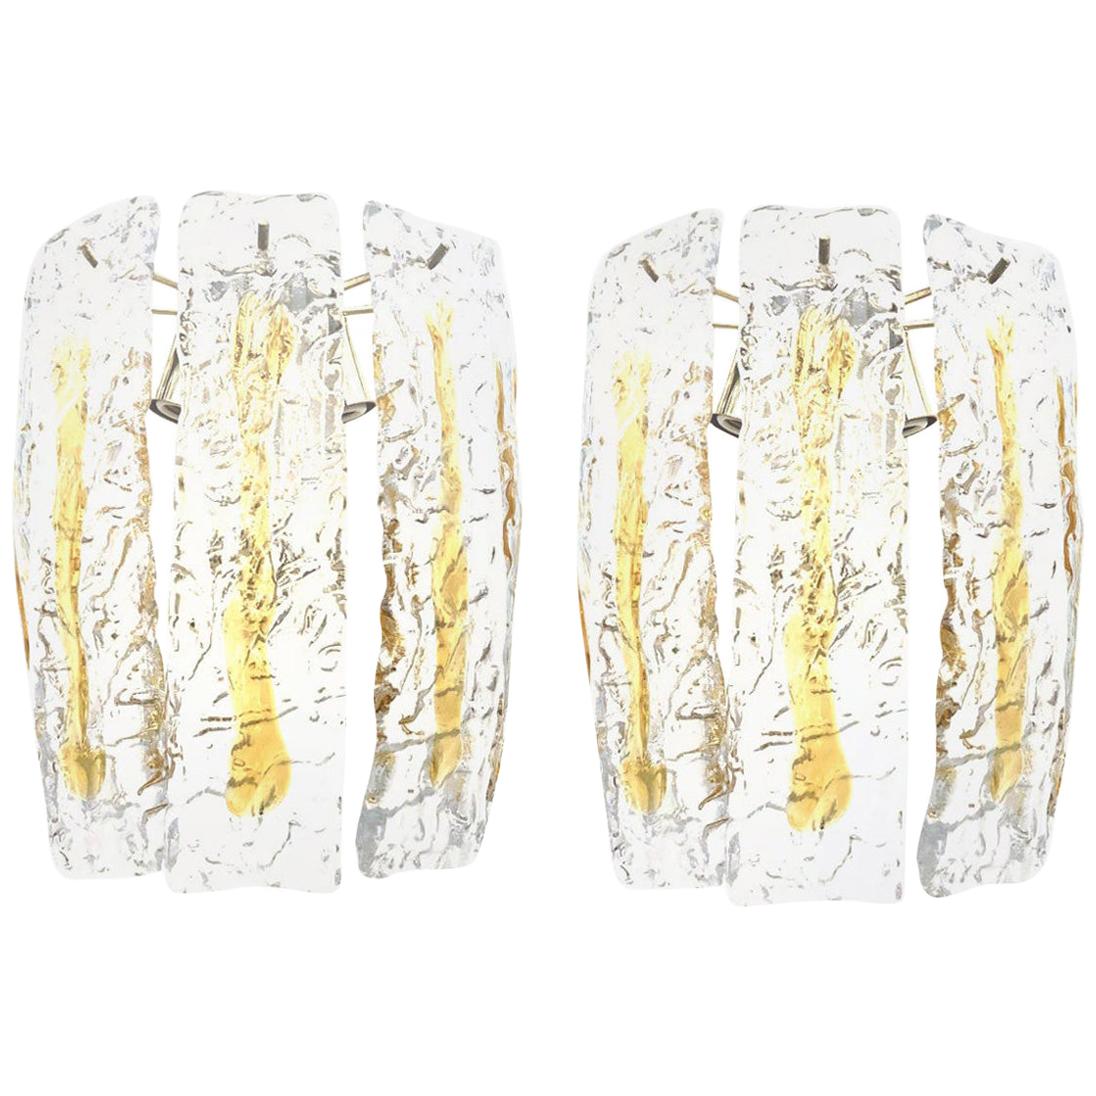 Pair of Italian Midcentury Murano Glass Wall Sconces by Mazzega, 1970s